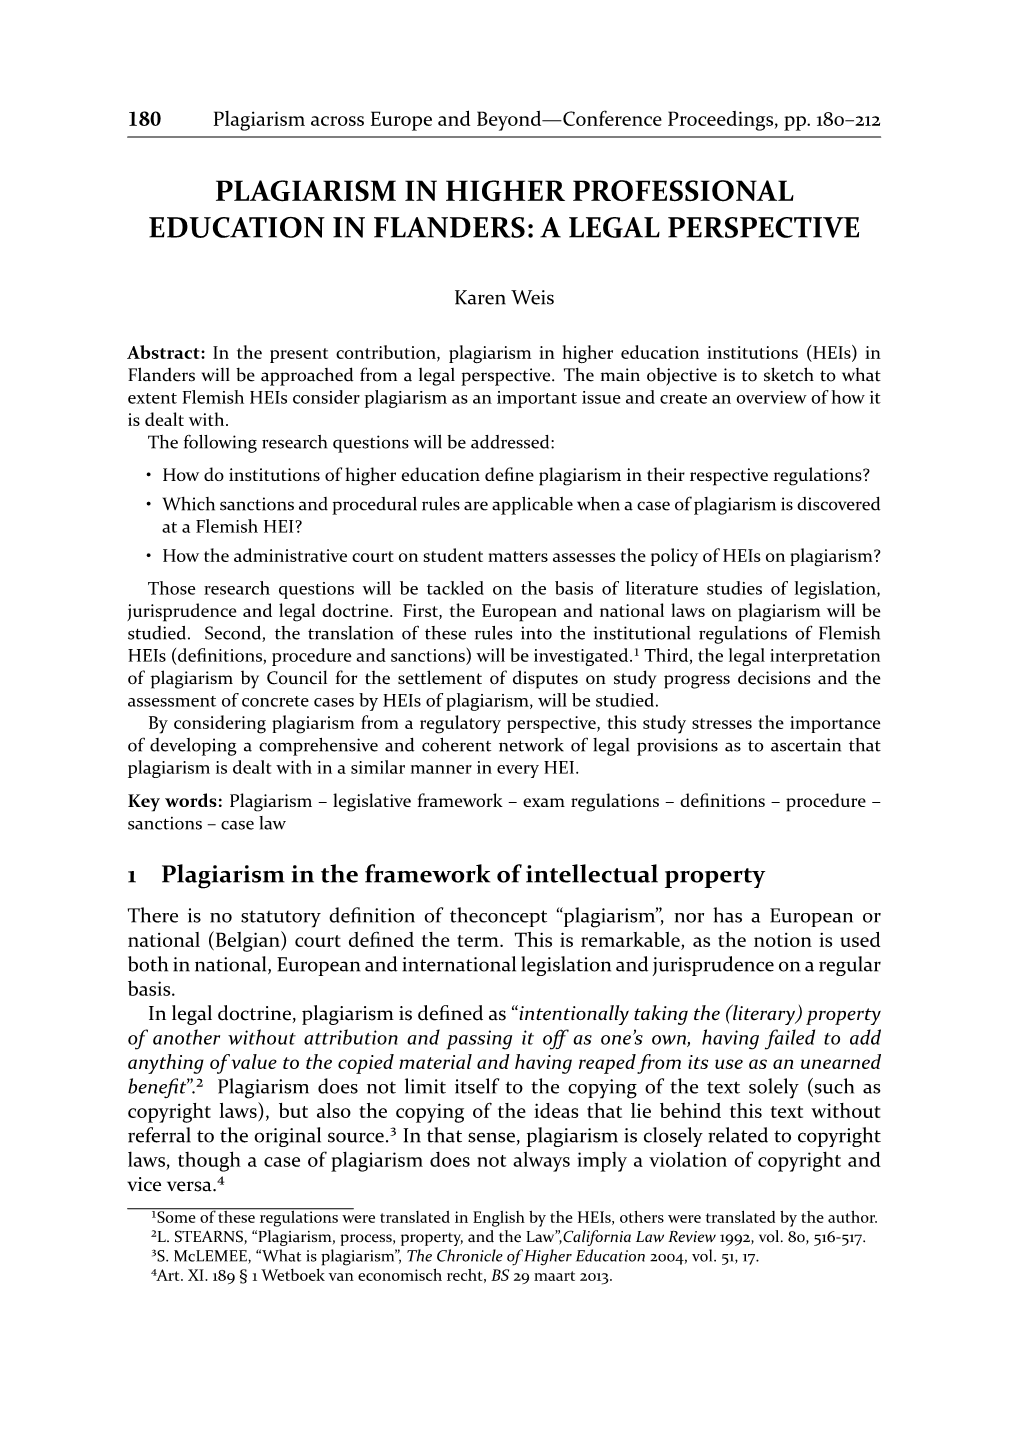 Plagiarism in Higher Professional Education in Flanders: a Legal Perspective